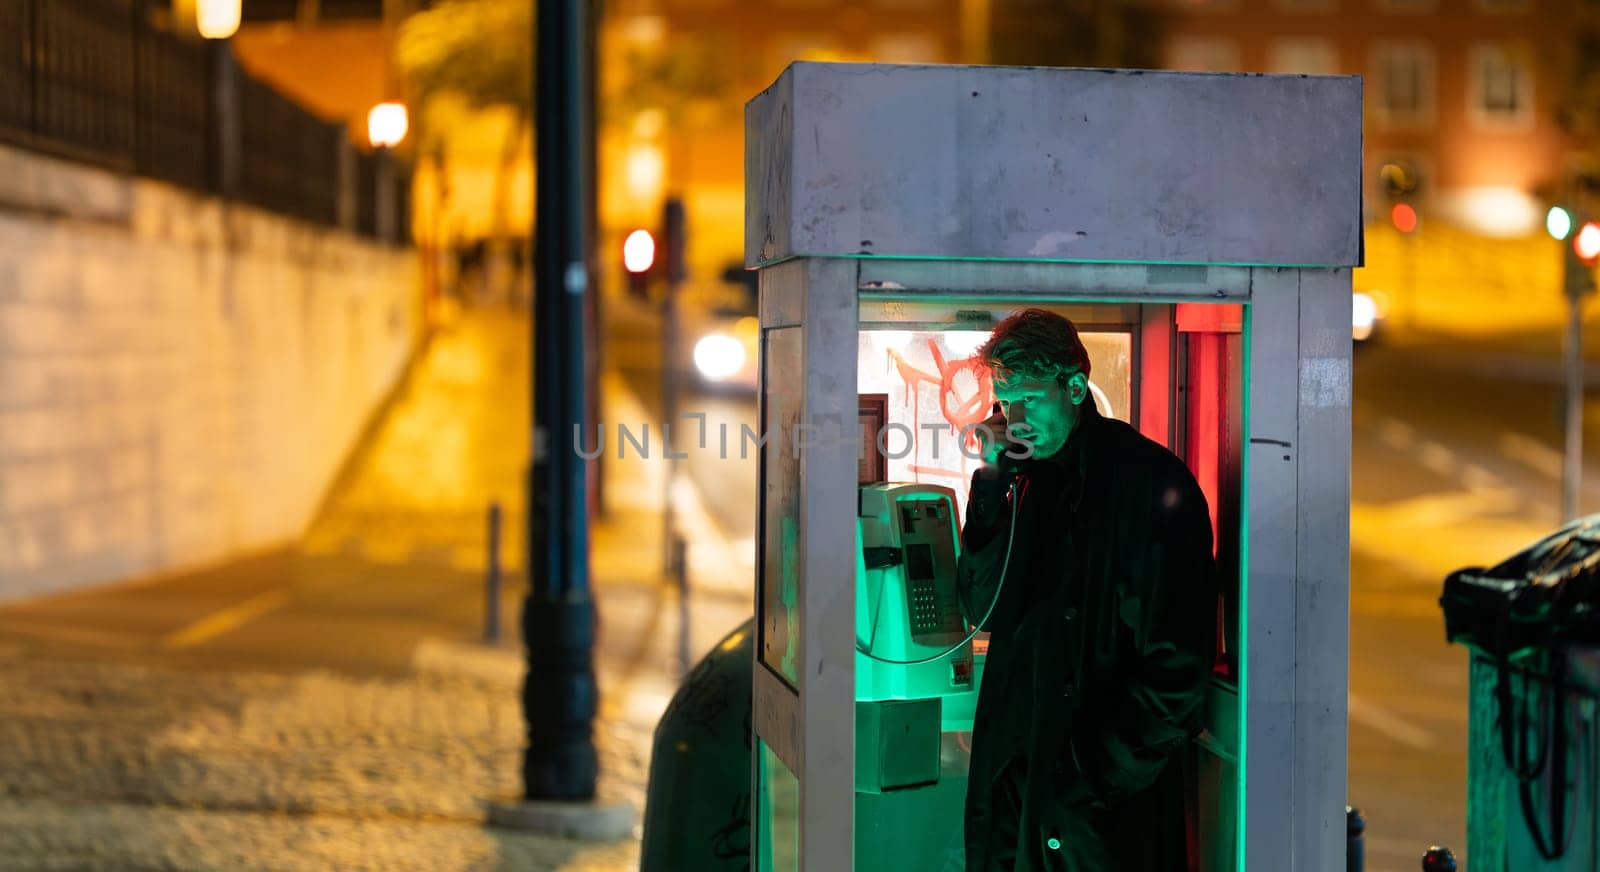 A man is talking on a phone at noir style in booth The image has a dark and moody atmosphere, with the man's face illuminated by the phone's light